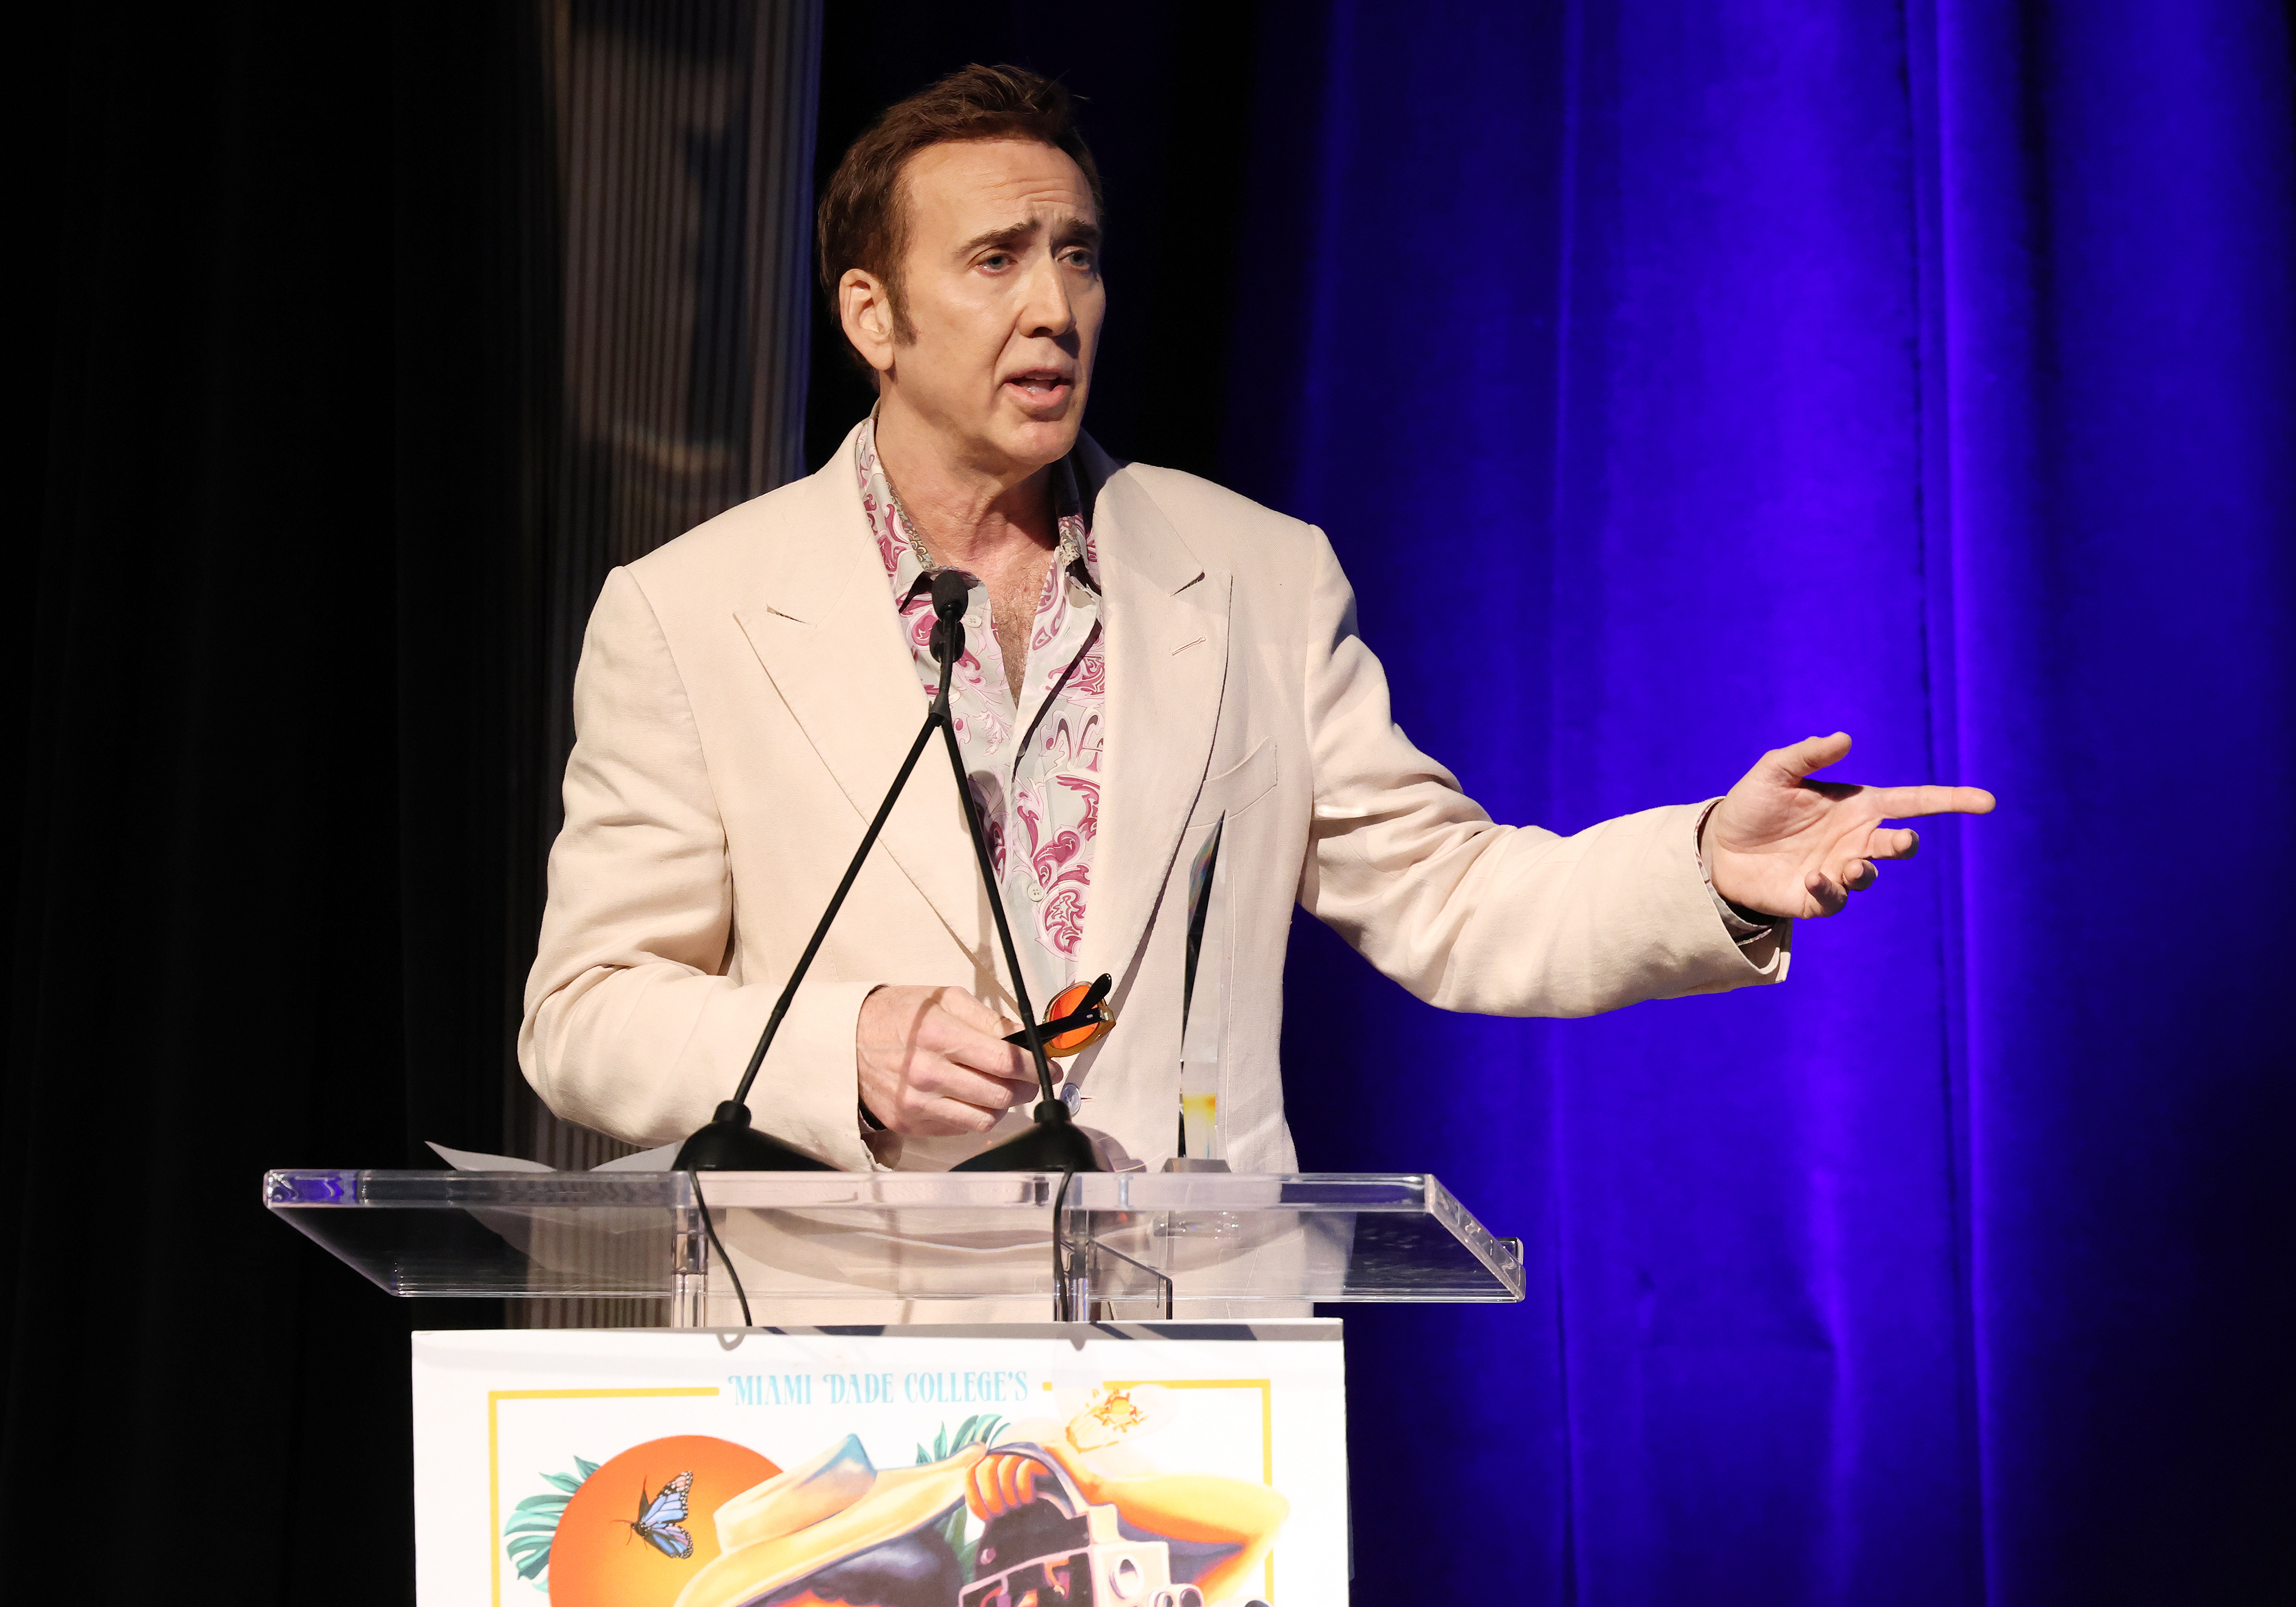 Nicolas Cage speaks at the 40th Annual Miami Film Festival Variety Legends and Groundbreakers Award celebration in Miami, Florida, on March 5, 2023. | Source: Getty Images